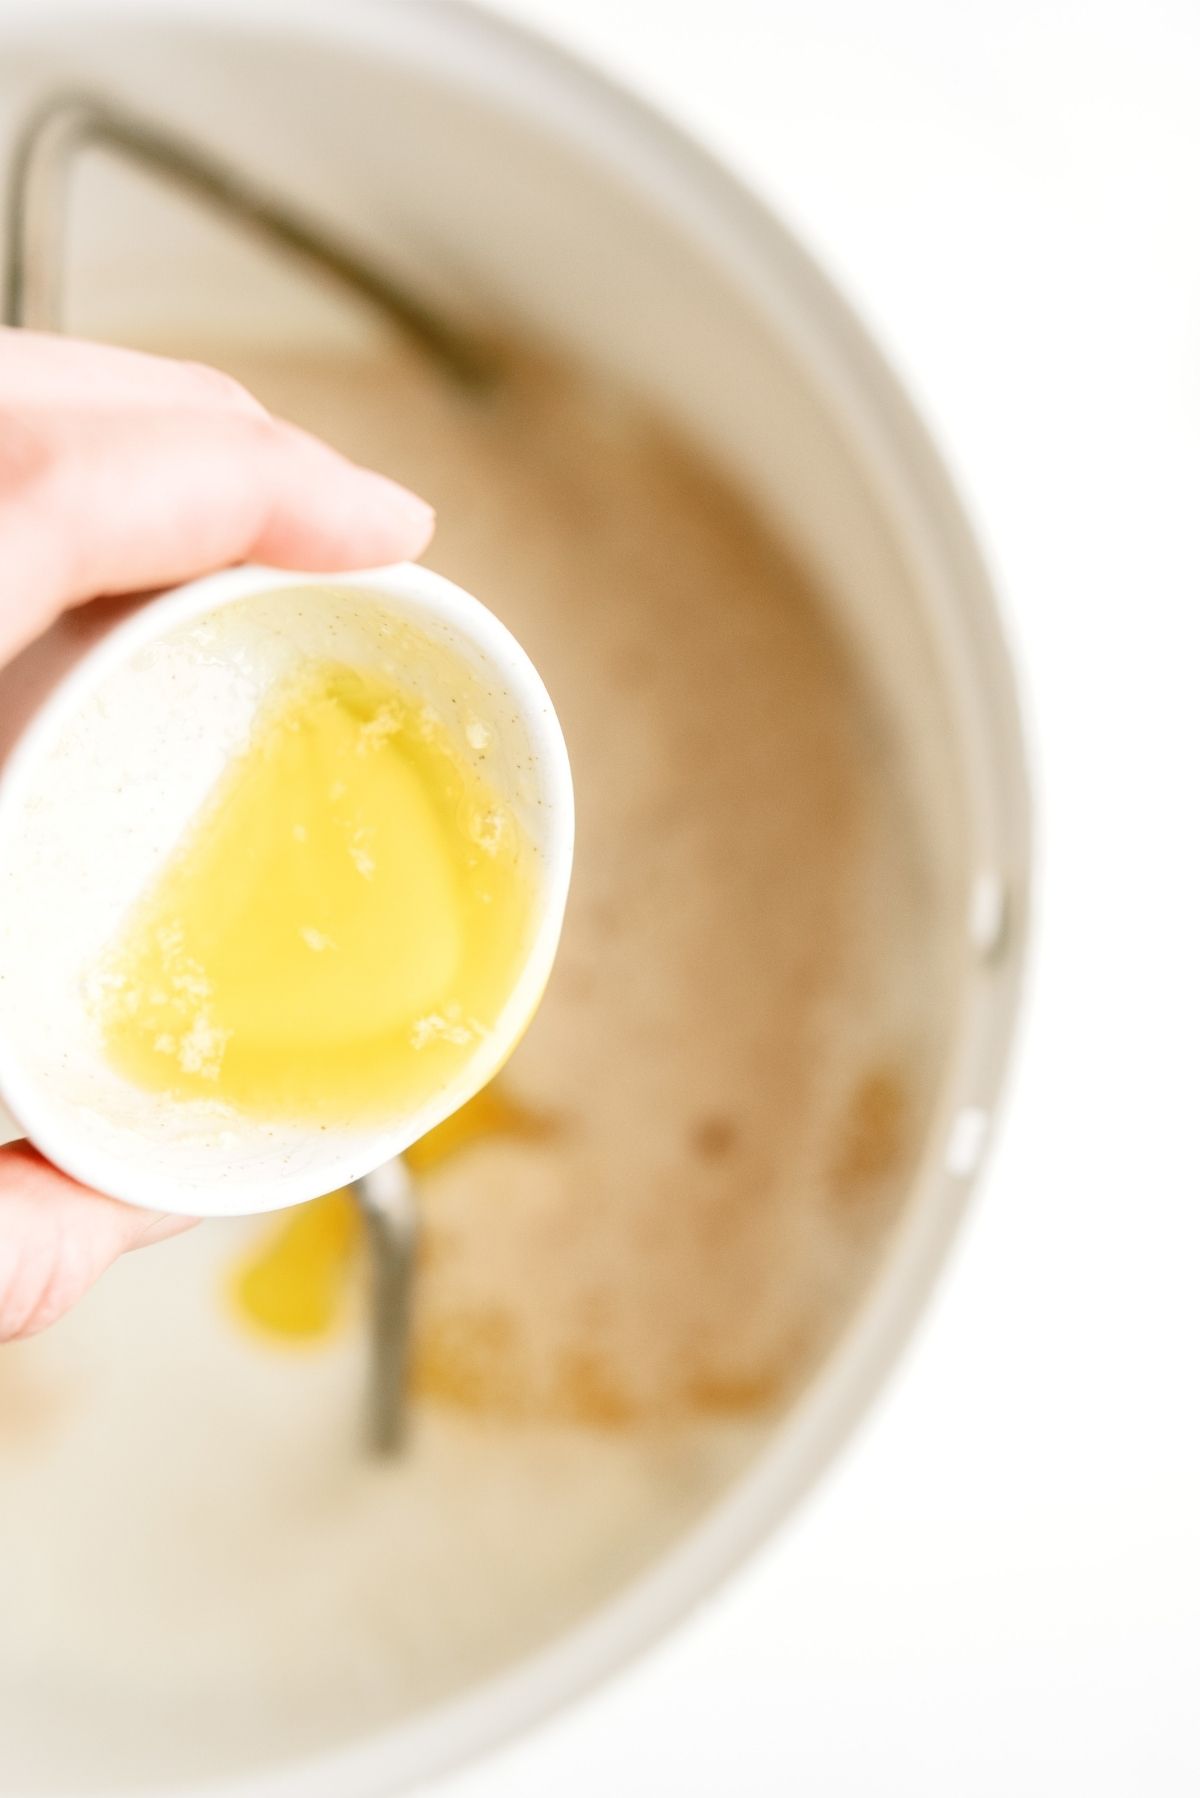 Melted butter poured into mixing bowl with other ingredients